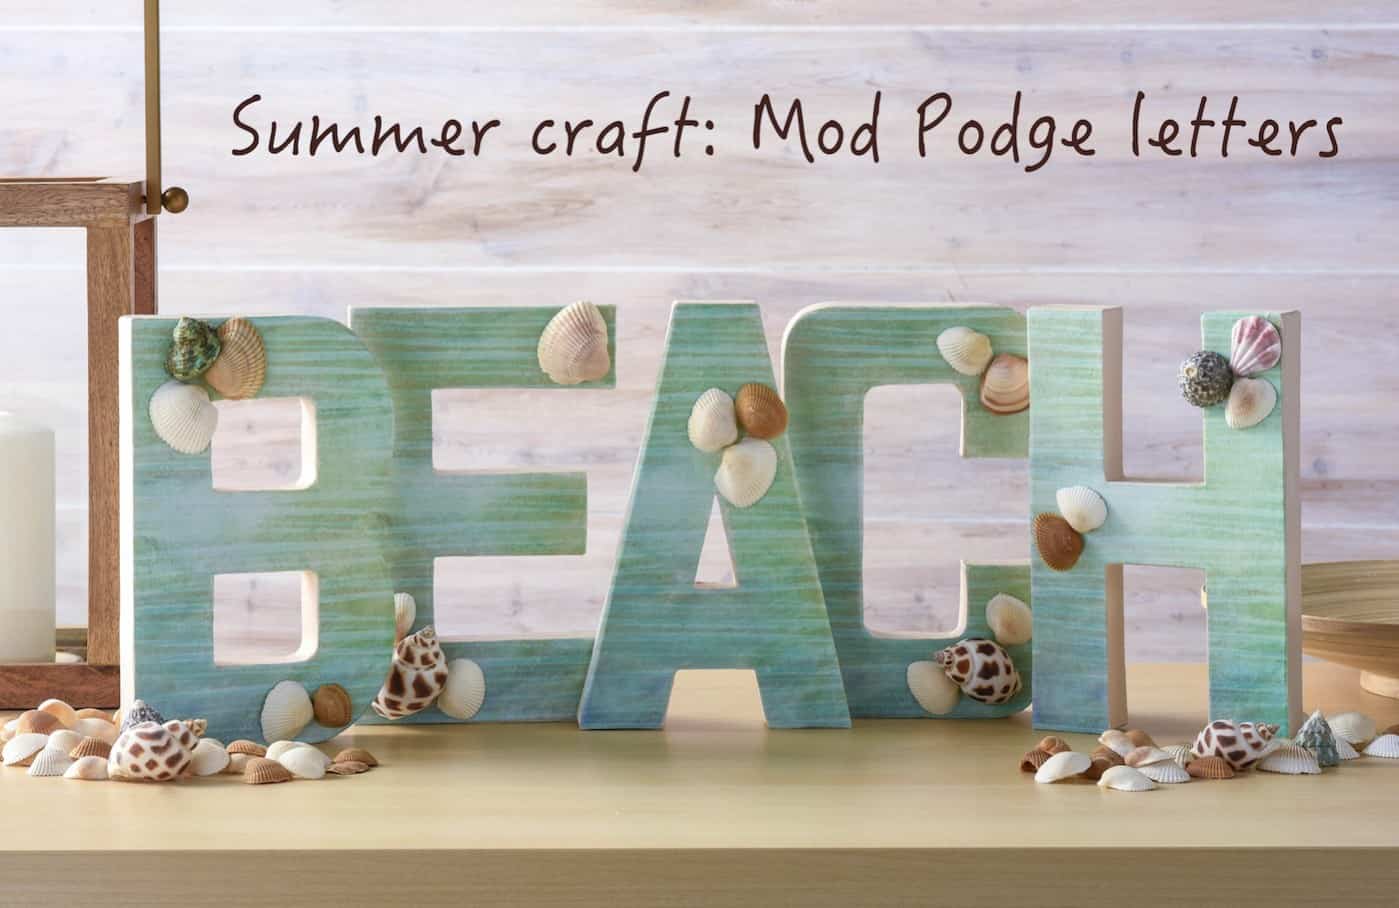 Beach letters made with Mod Podge